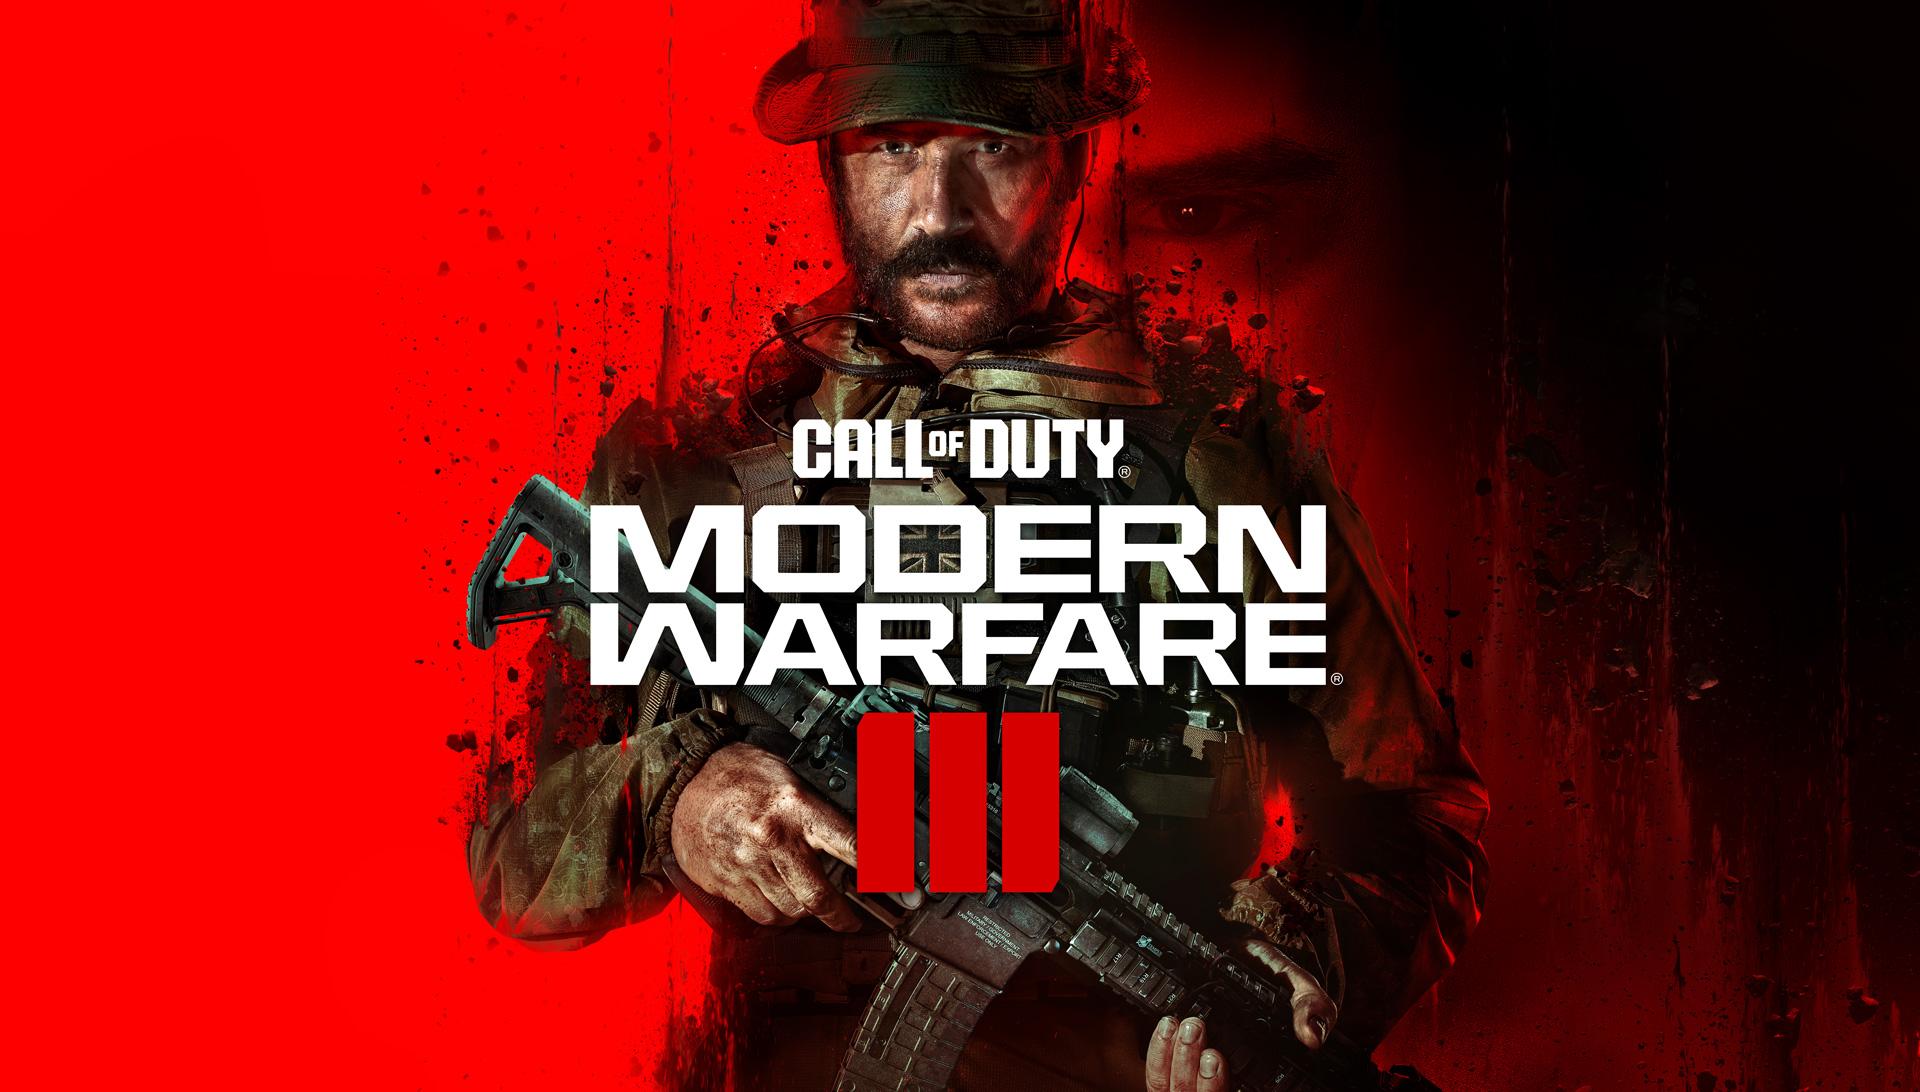 Call of Duty: Modern Warfare 3 release sees UK's biggest-ever gaming  traffic for internet service providers